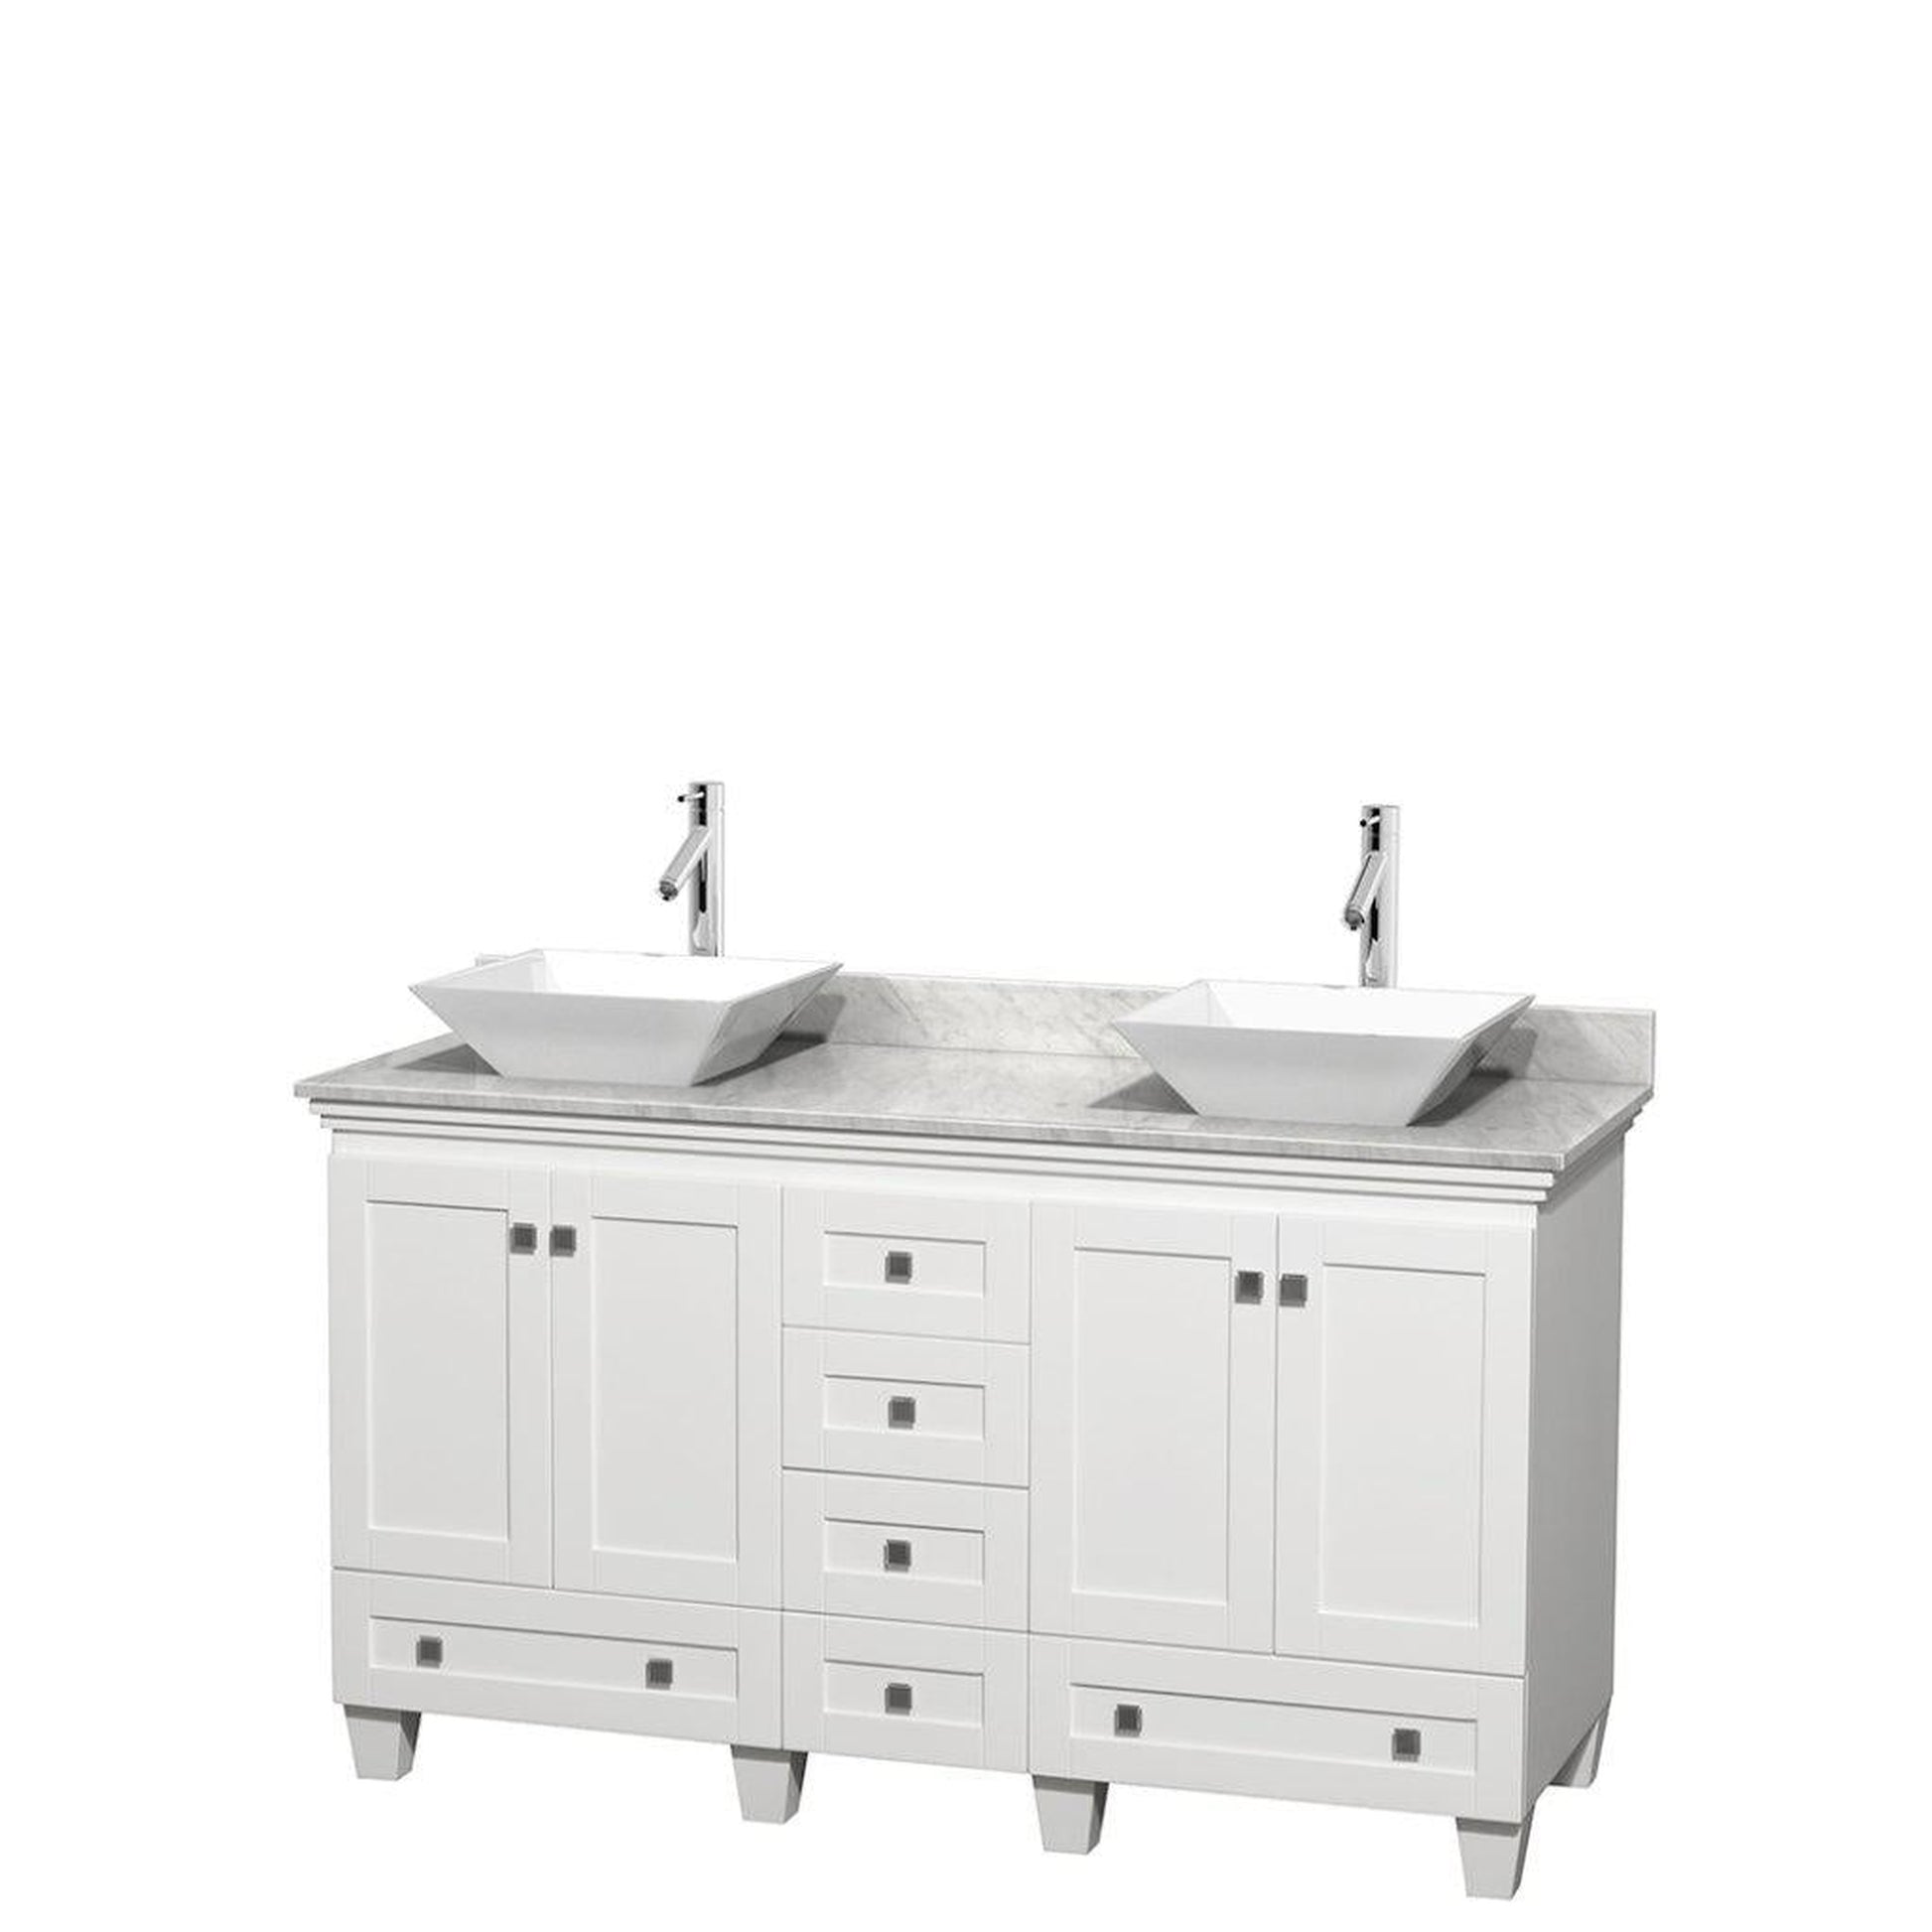 Wyndham Collection Acclaim 60" Double Bathroom White Vanity With White Carrara Marble Countertop And Pyra White Sinks